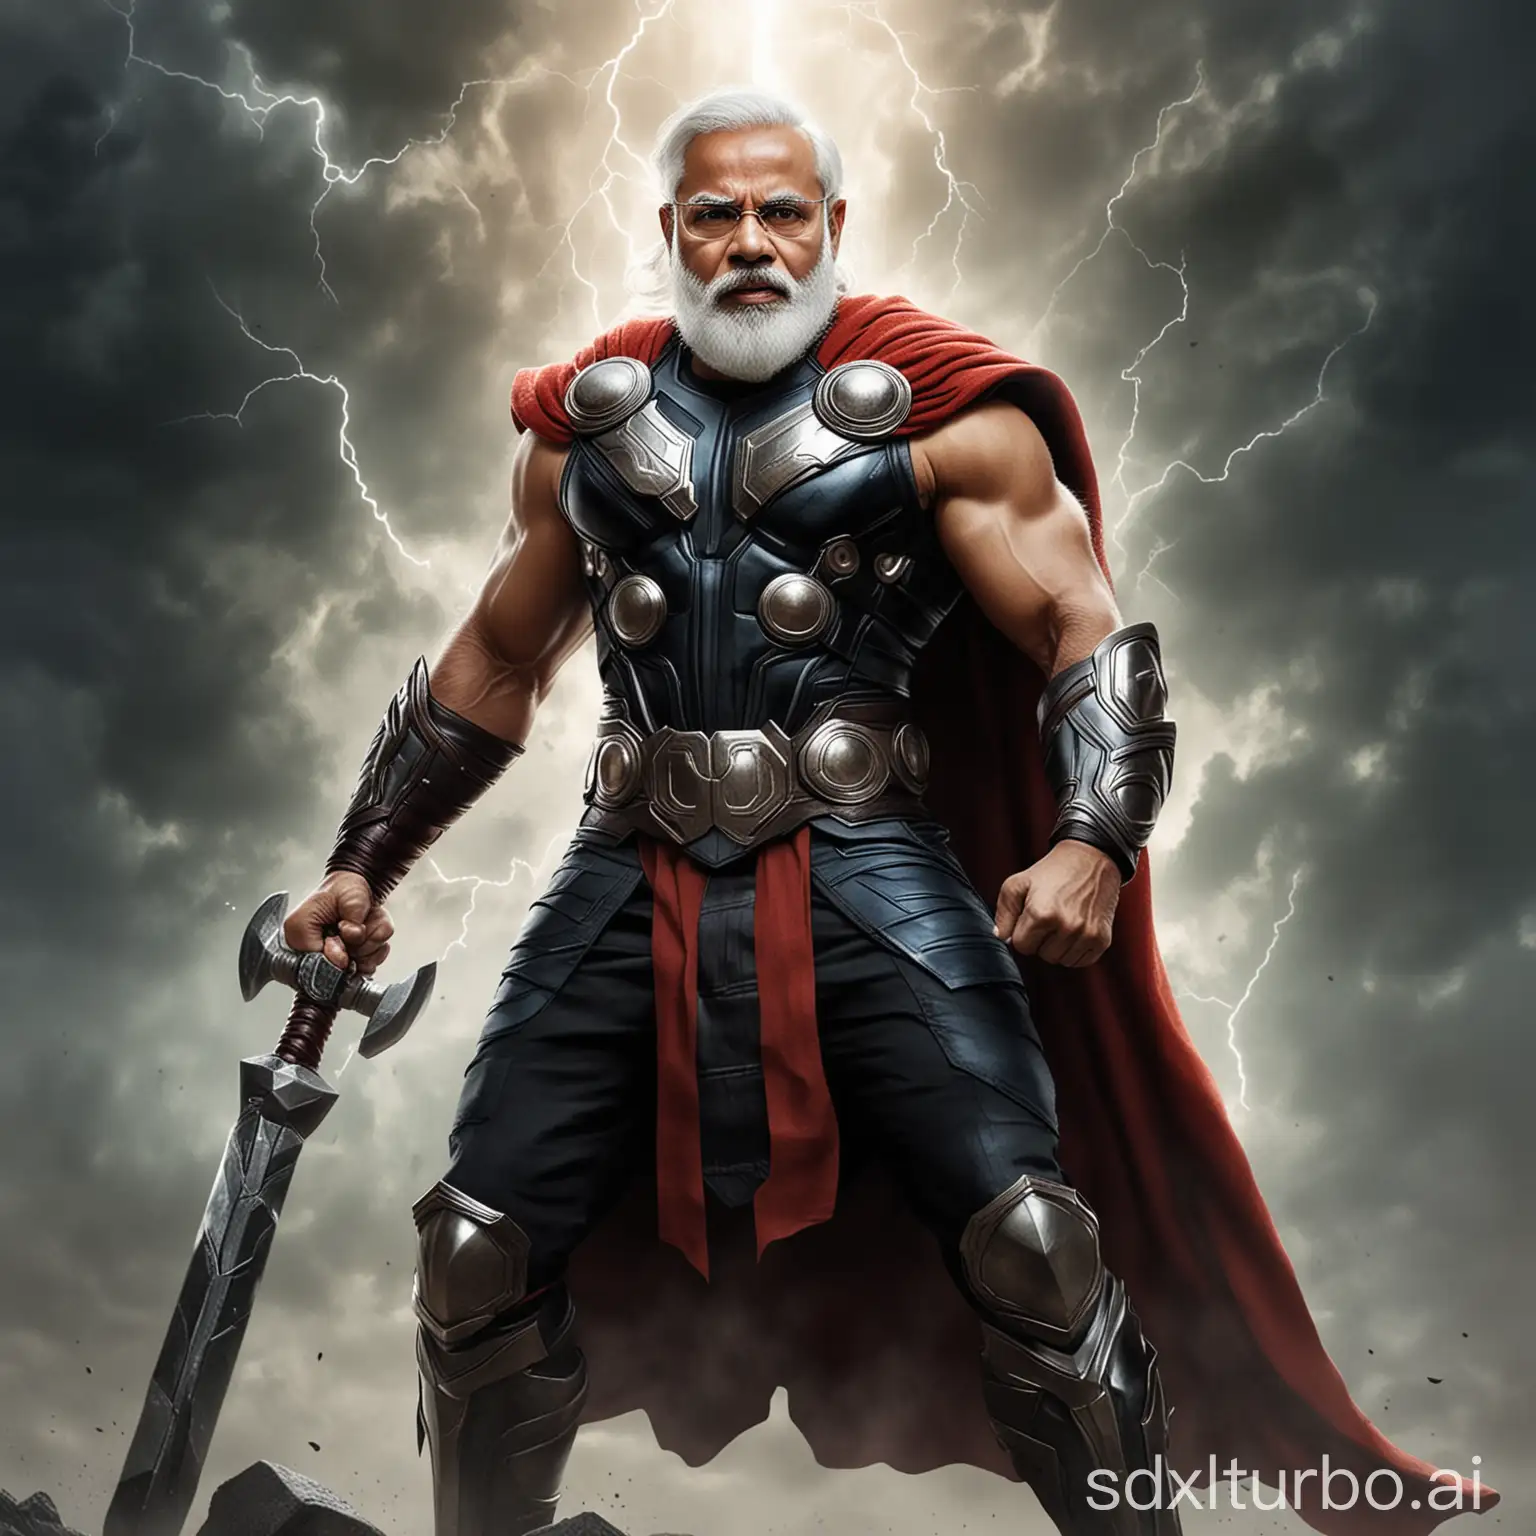 Narendra-Modi-Portrayed-as-Thor-Political-Leader-with-the-Power-of-Thunder